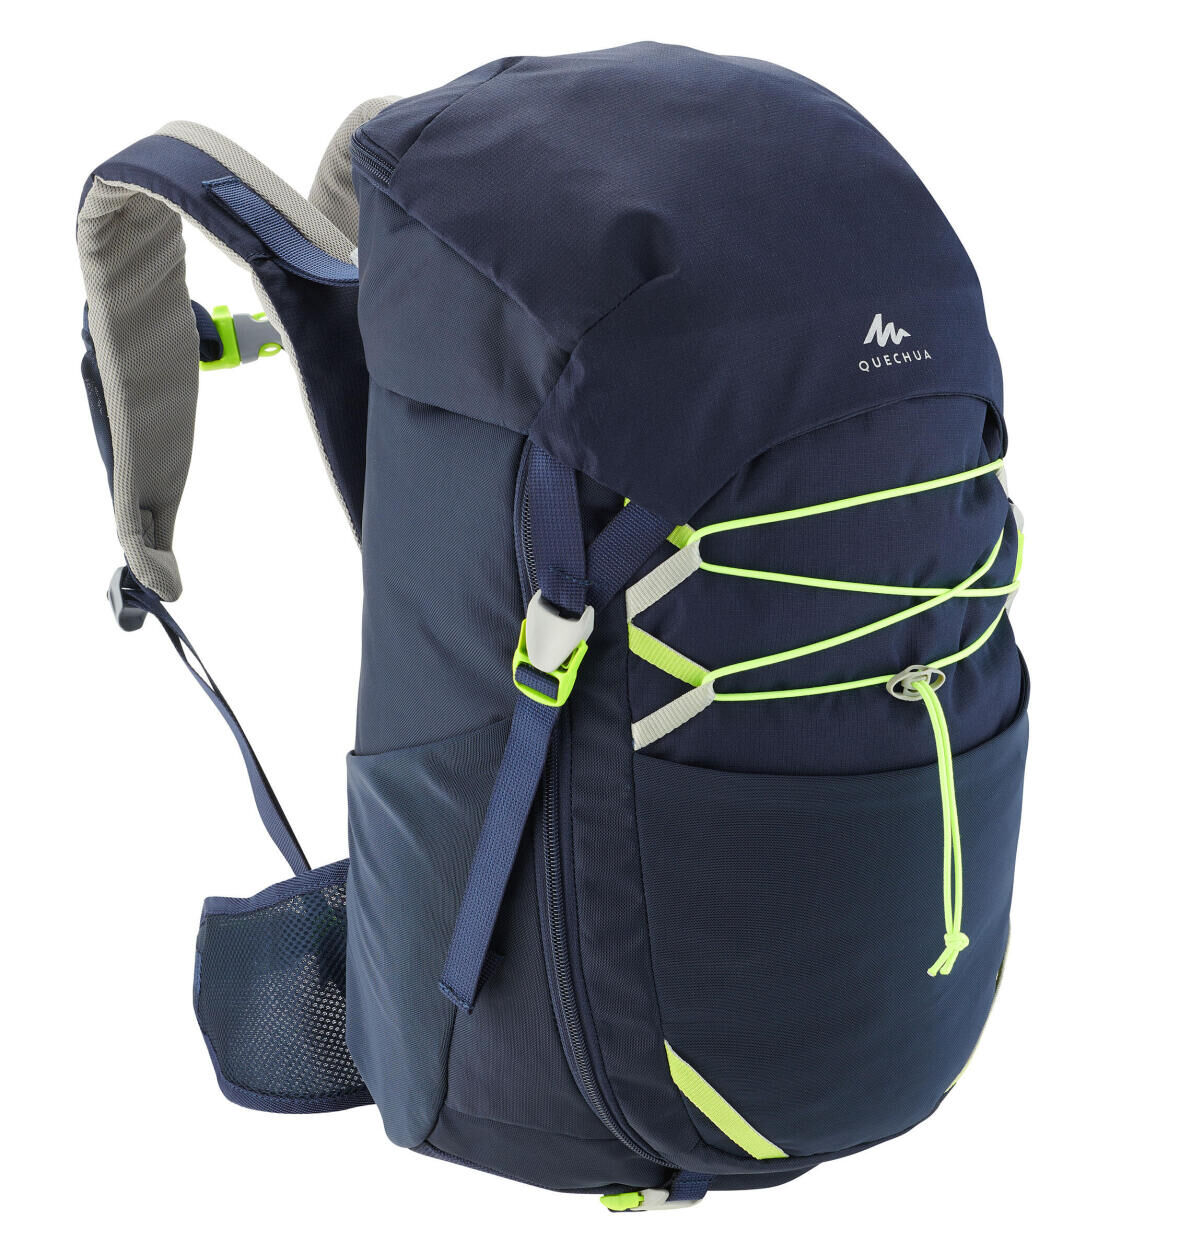 WHAT TO TAKE IN YOUR BACKPACK WHEN GOING HIKING WITH YOUR PRE-TEEN?